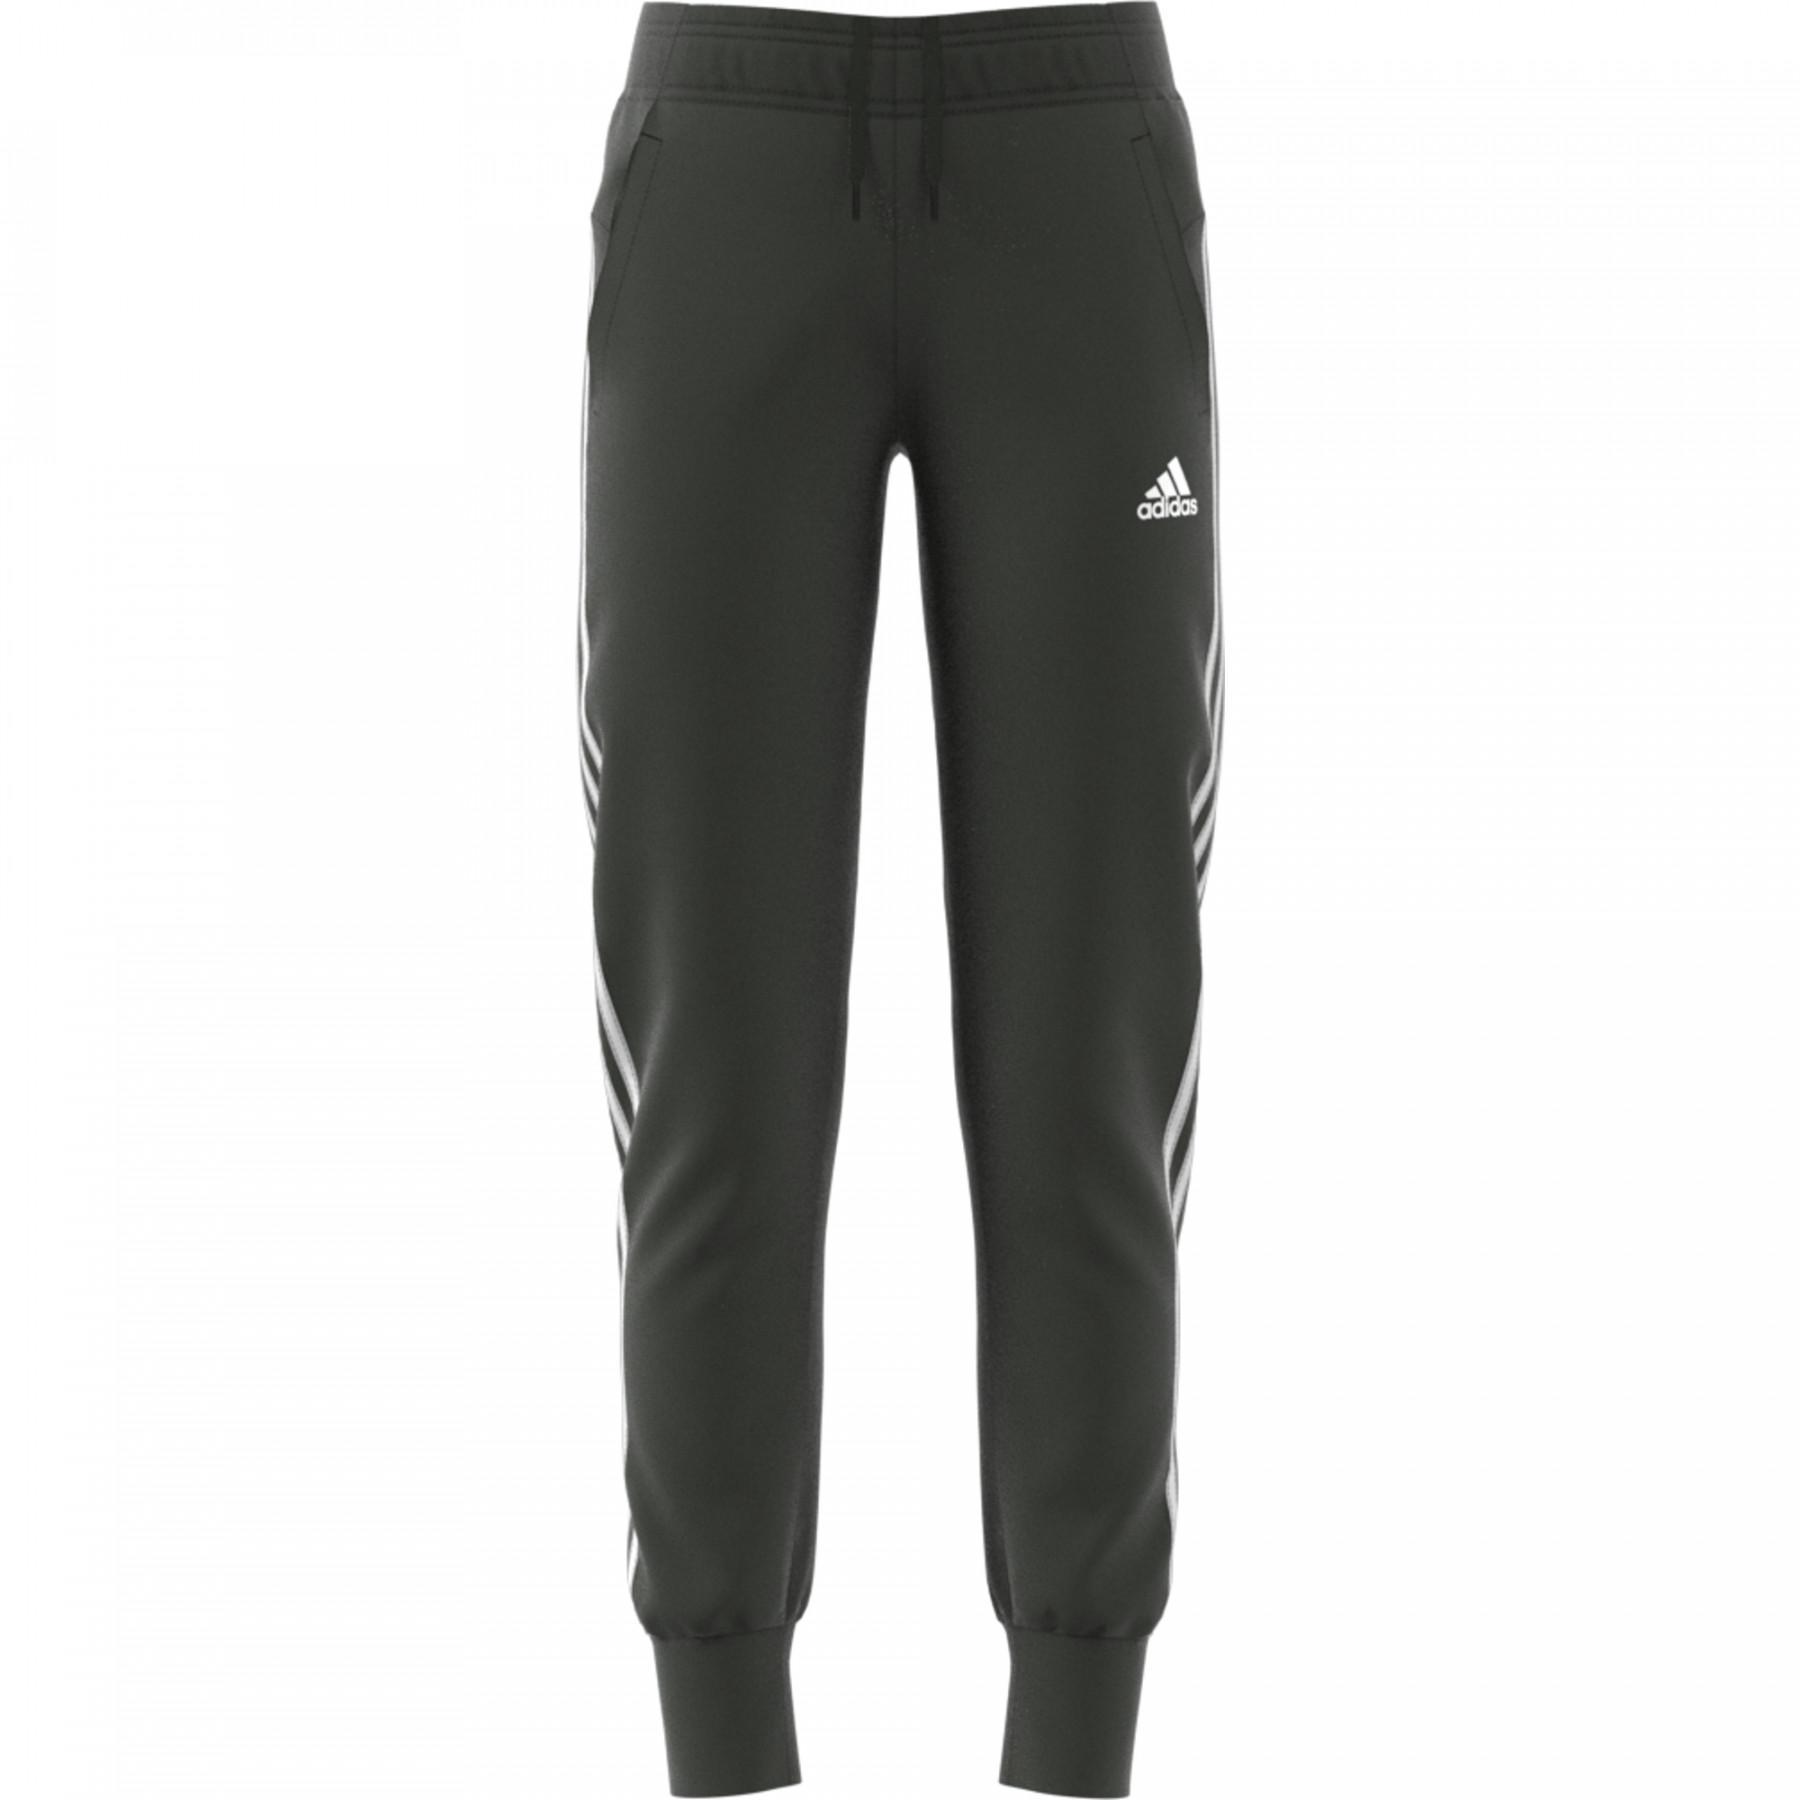 Women's trousers child adidas Must Haves 3-Stripes - adidas